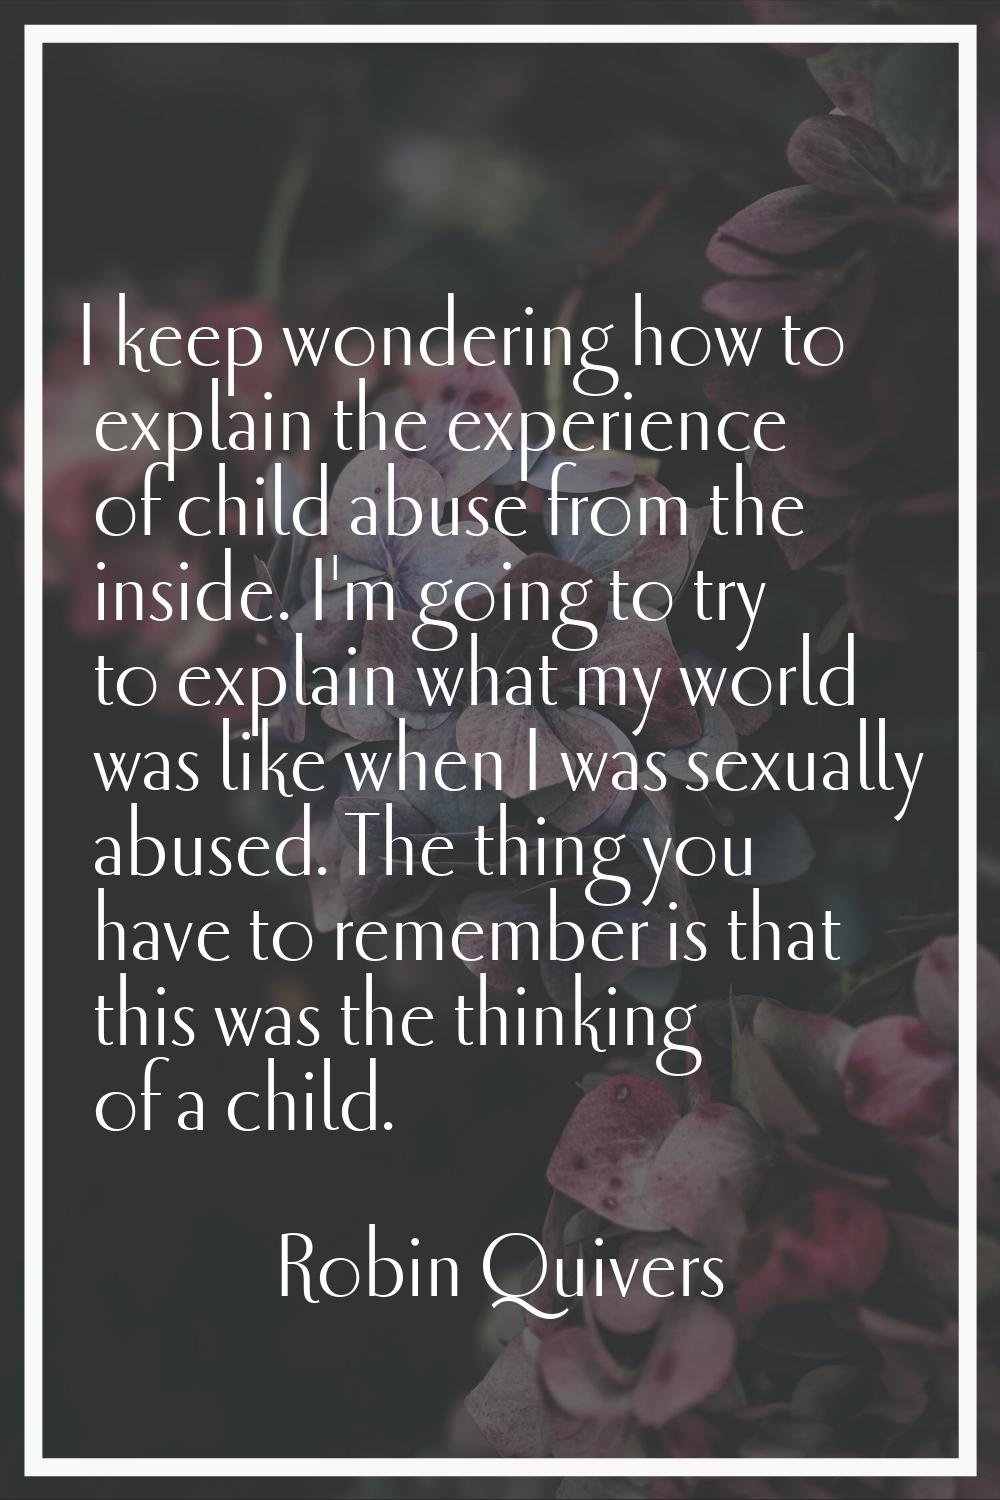 I keep wondering how to explain the experience of child abuse from the inside. I'm going to try to 